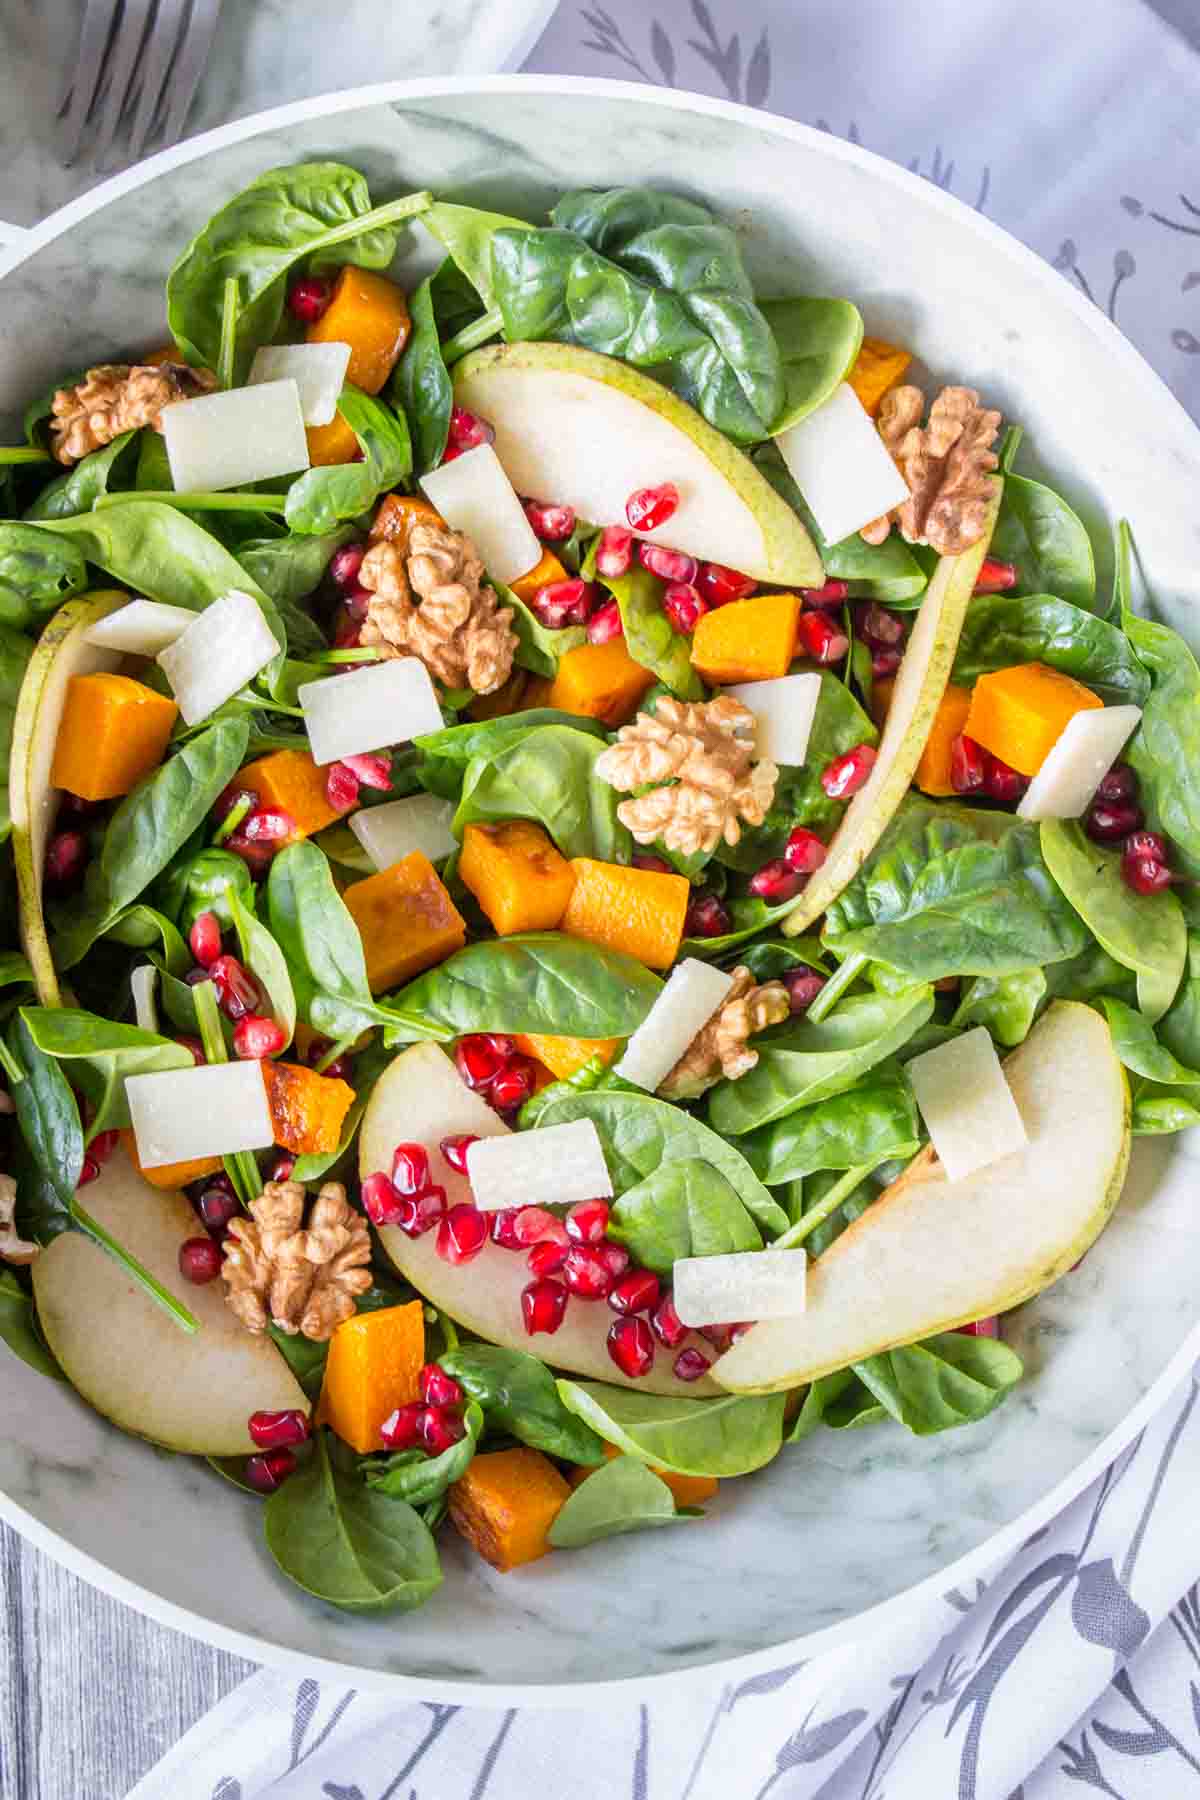 Pumpkin Pear Salad with baby spinach and walnuts topped with cheese and seeds served in a bowl